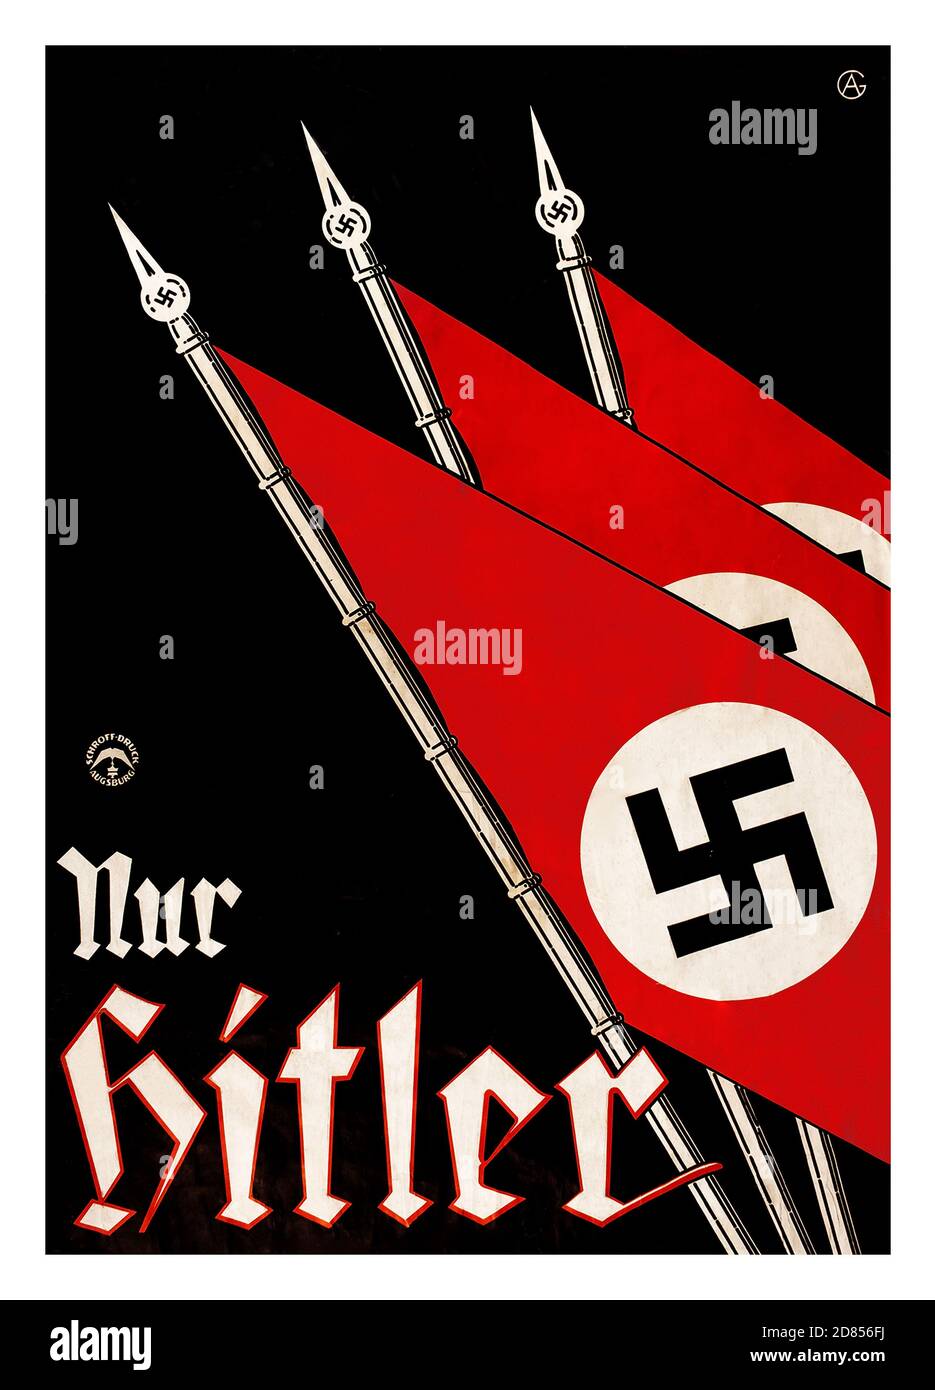 Vintage 1930's 'Only Hitler” nur HITLER Propaganda Poster Lithograph NSDAP Nazi Presidential Election c.1932 Germany. The National Socialist German Workers Party (NSDAP) was founded in 1920s. The ideology relied  on German nationalism and anti-Semitism. By 1921, Adolf Hitler became the leader of the NSDAP, a position which would later propel him to become dictator of the Nazi Germany German Third Reich. NSDAP populist image kept in the mind of the German voters. Stock Photo